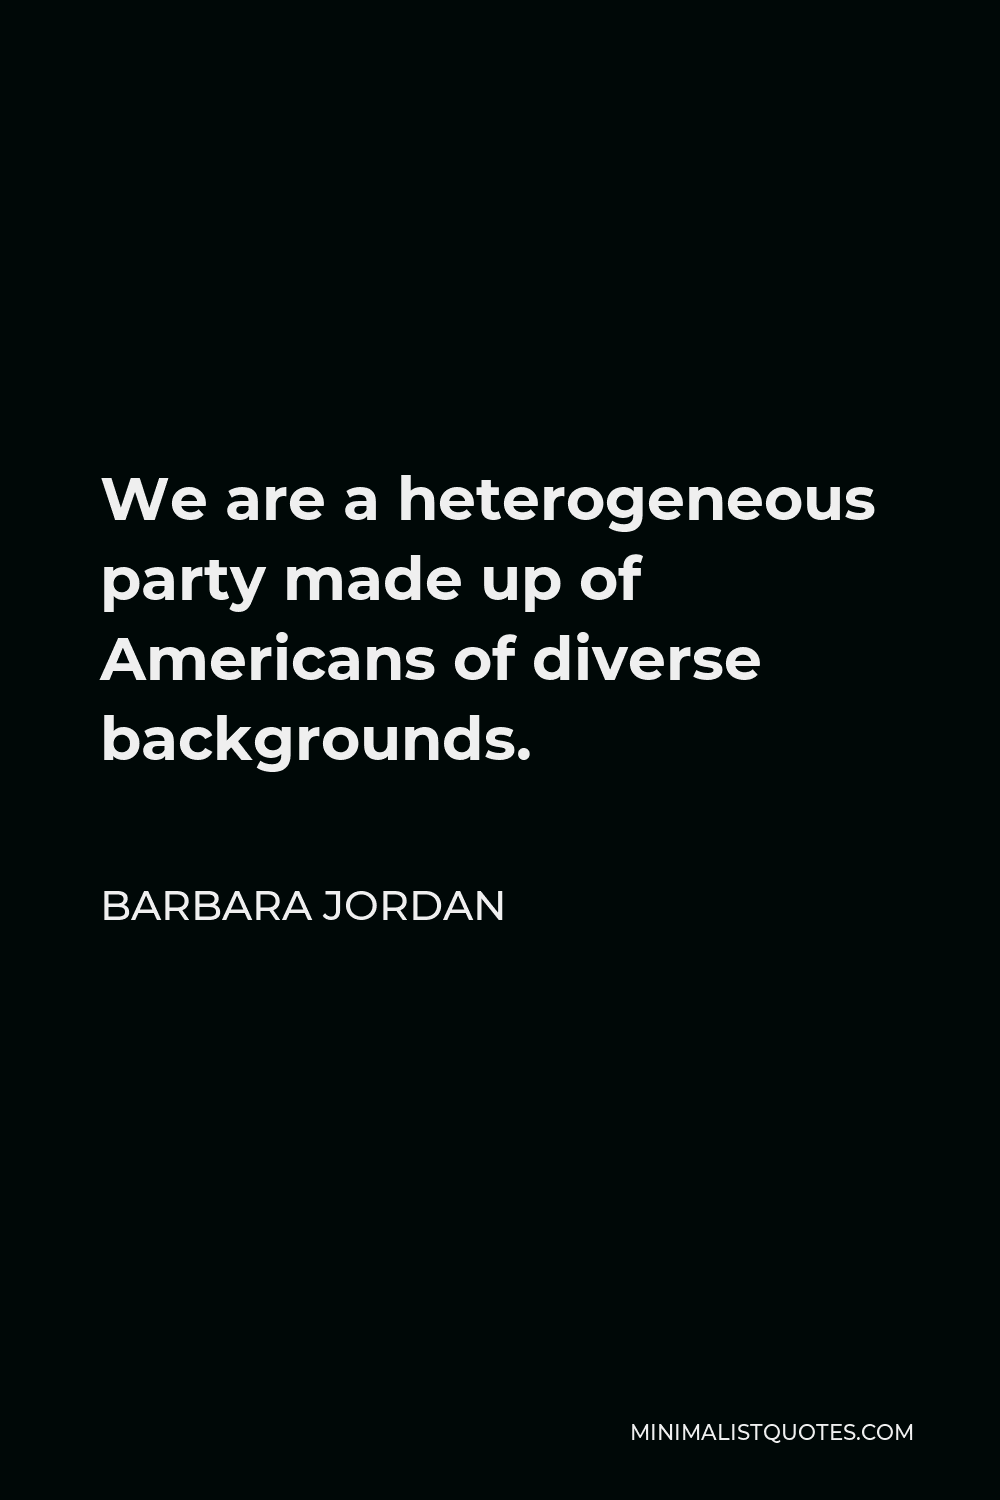 Barbara Jordan Quote - We are a heterogeneous party made up of Americans of diverse backgrounds.